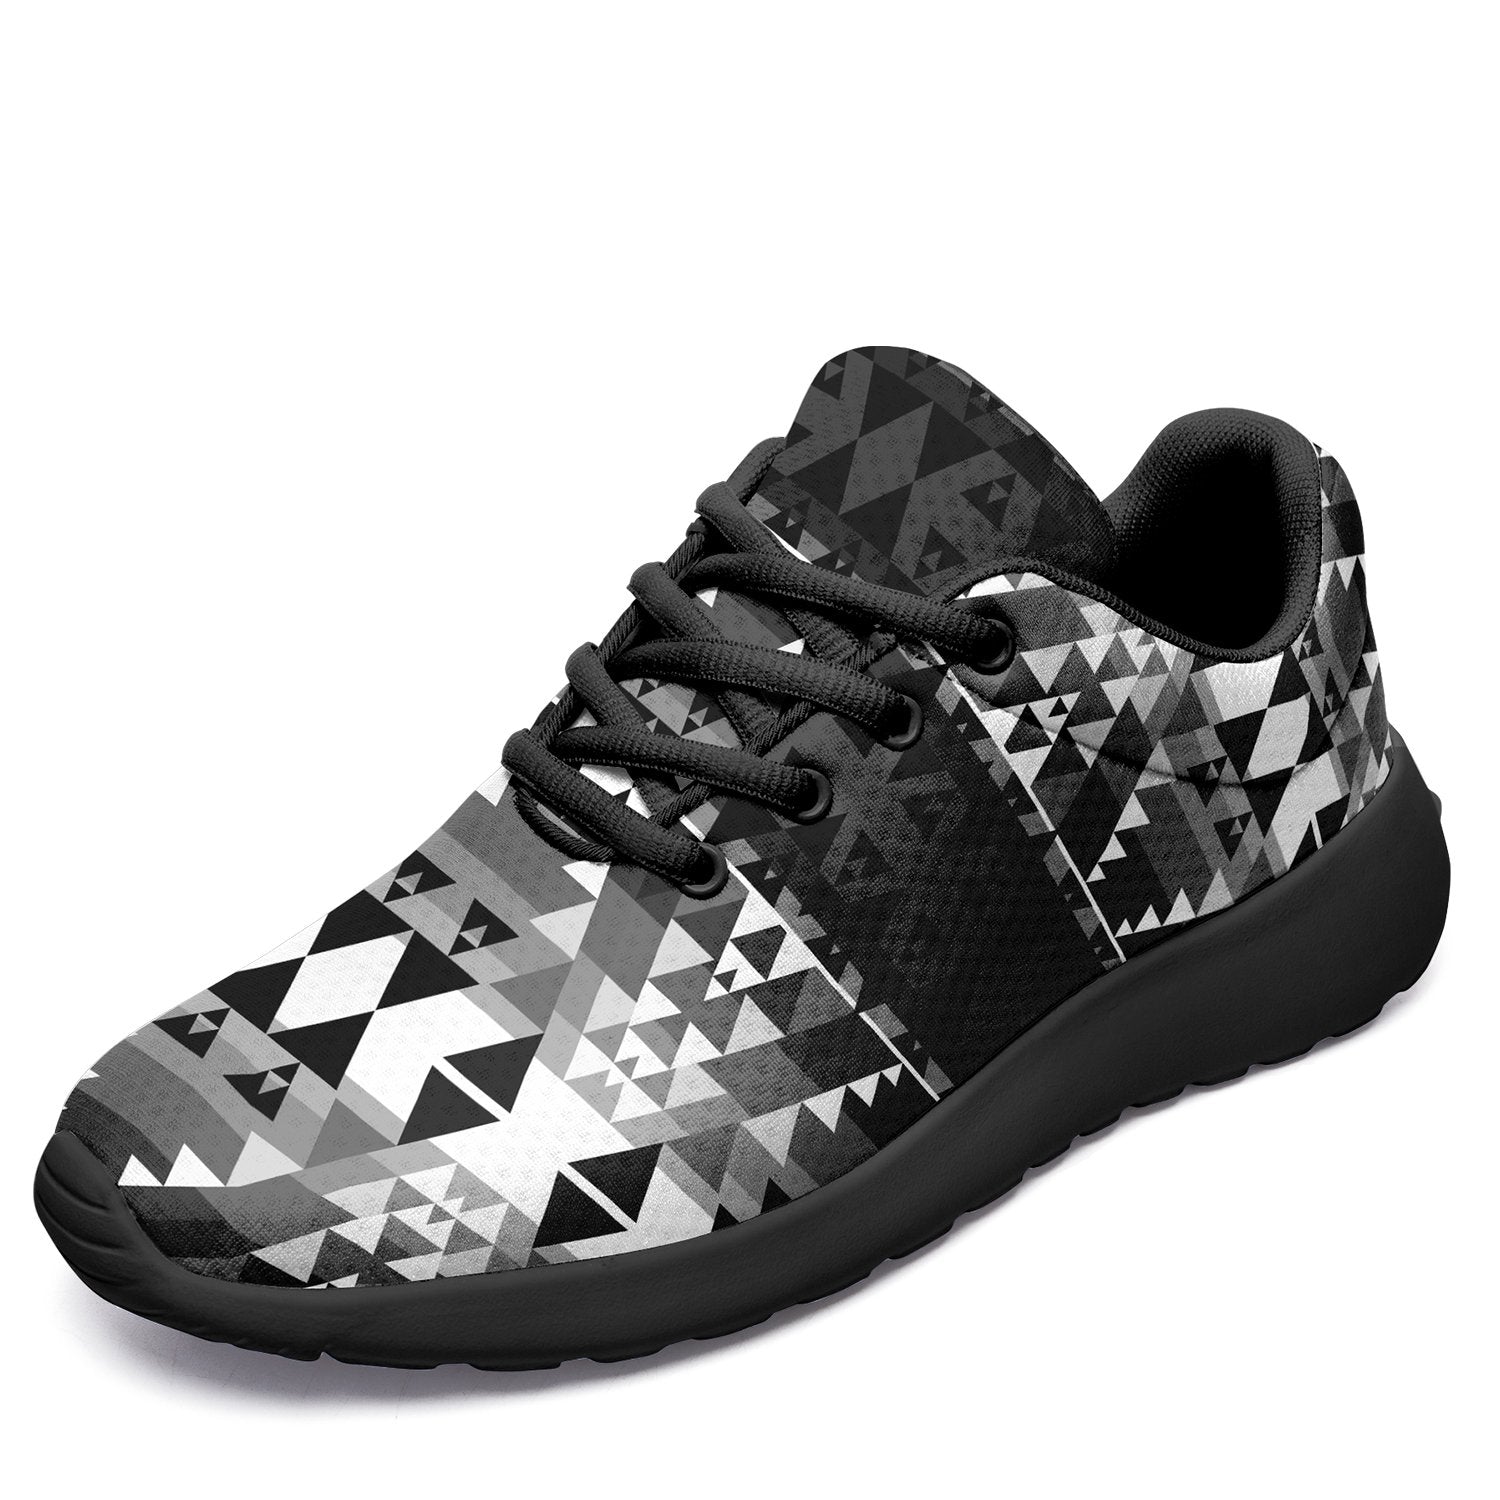 Writing on Stone Black and White Ikkaayi Sport Sneakers 49 Dzine US Women 4.5 / US Youth 3.5 / EUR 35 Black Sole 